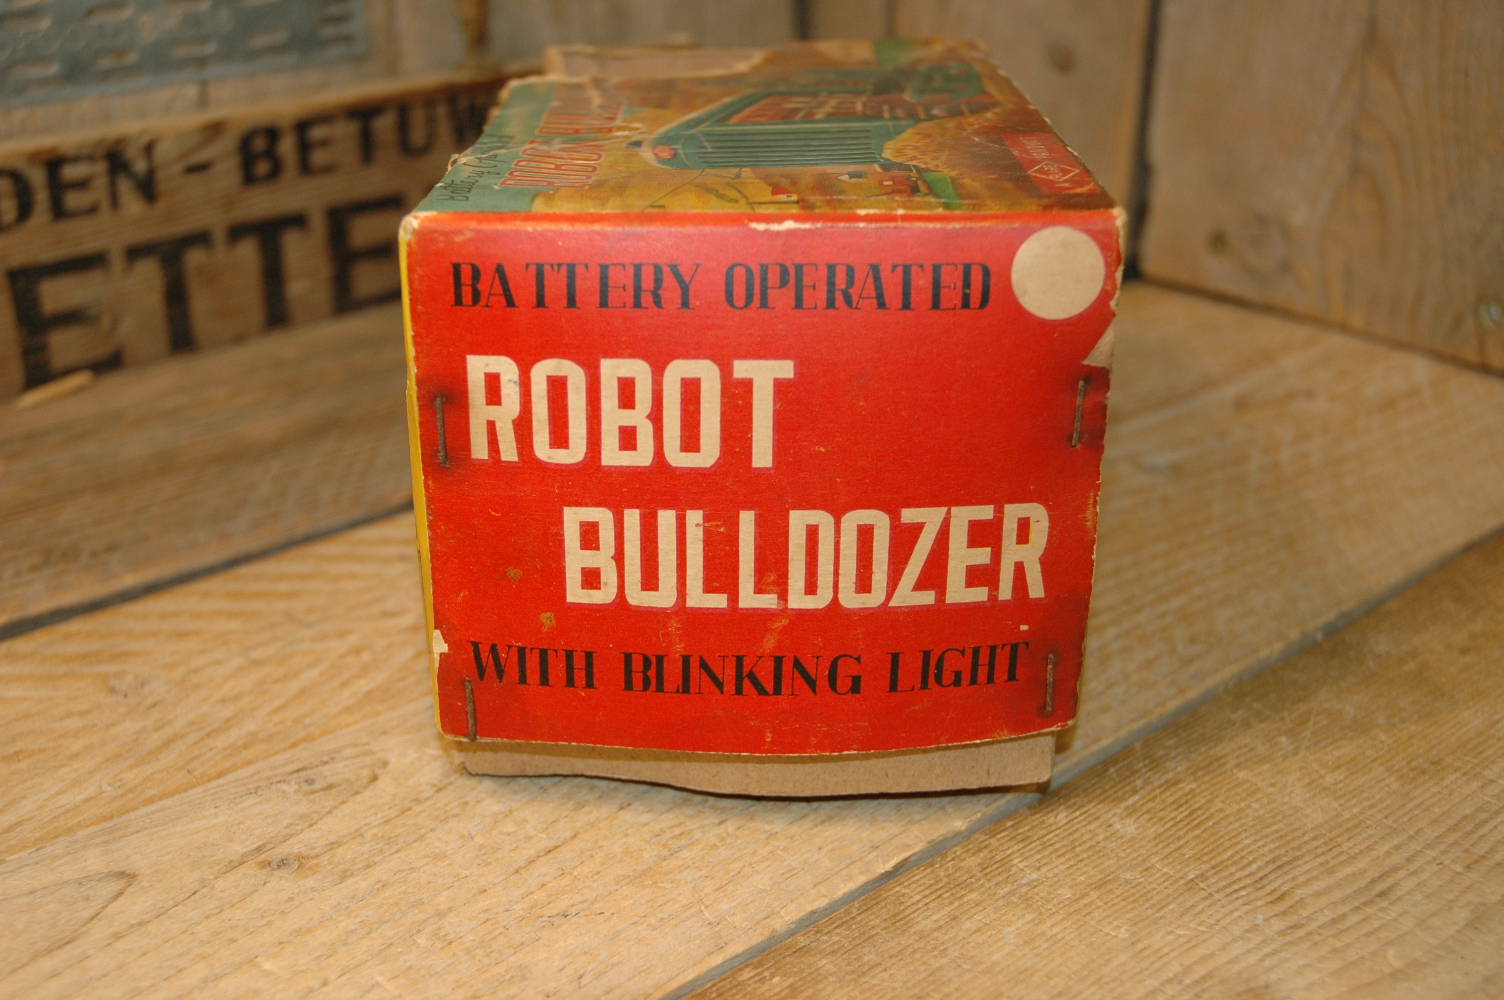 Flare / United Pioneer Company - Robot Bulldozer N0.115 with Blinking Light